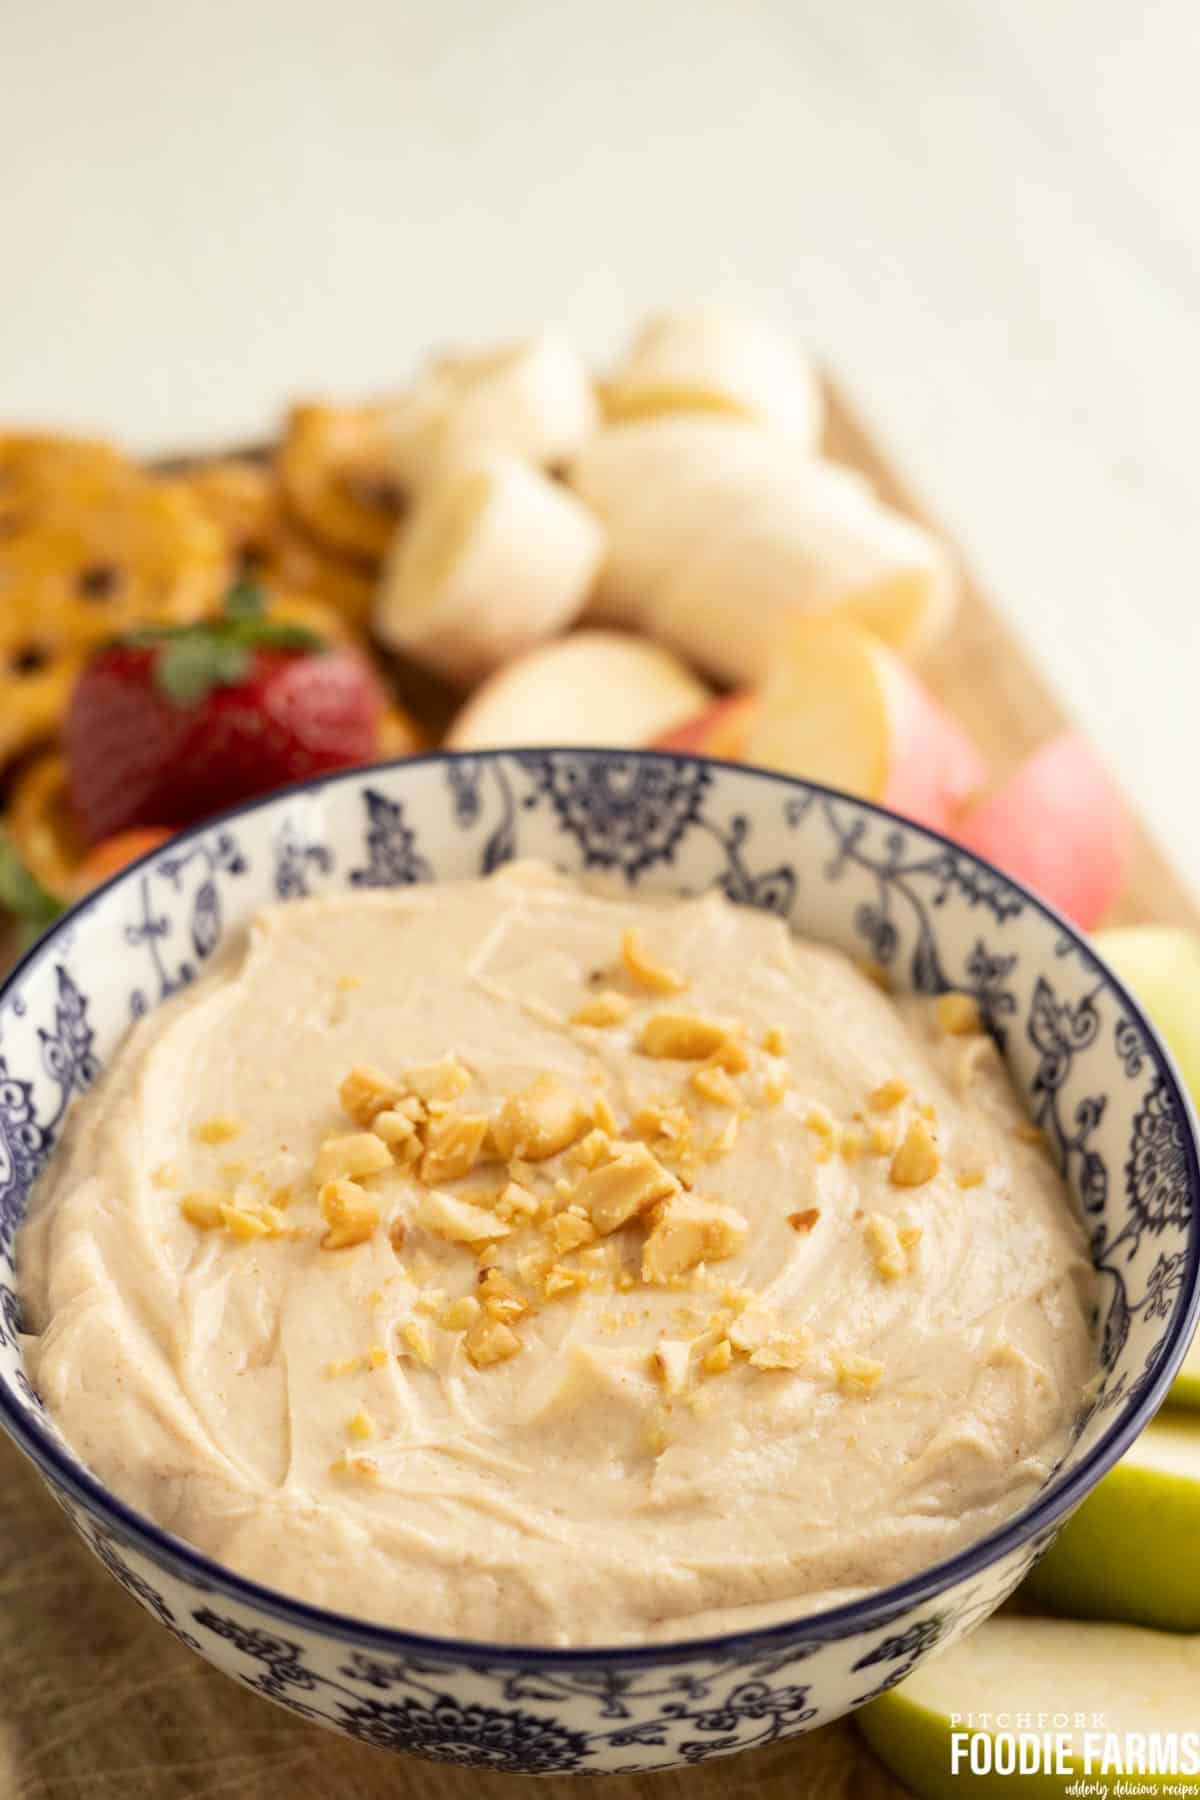 Peanut butter dip with sliced apples and fresh fruit.